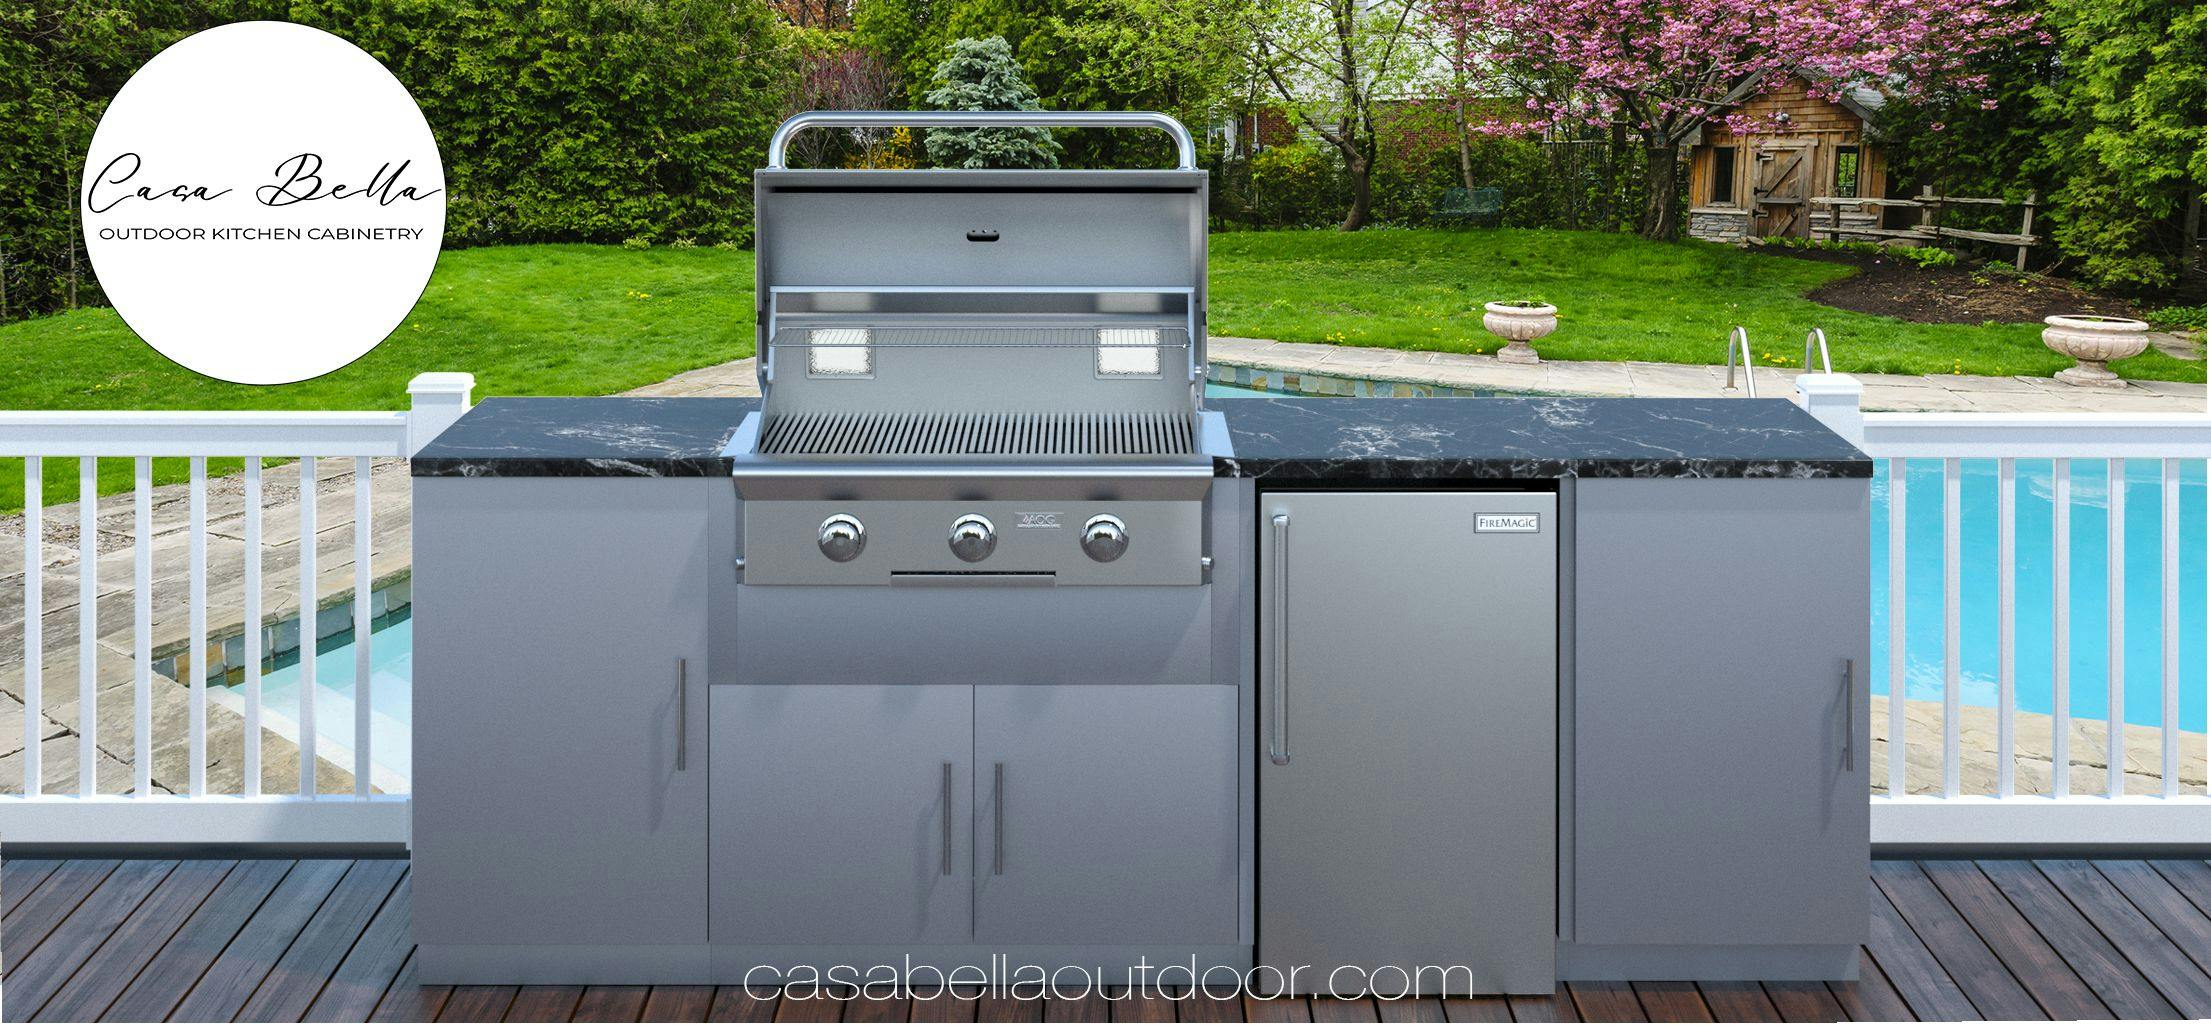 Why Deck Builders Should Sell Outdoor Kitchens From Casa Bella Outdoor